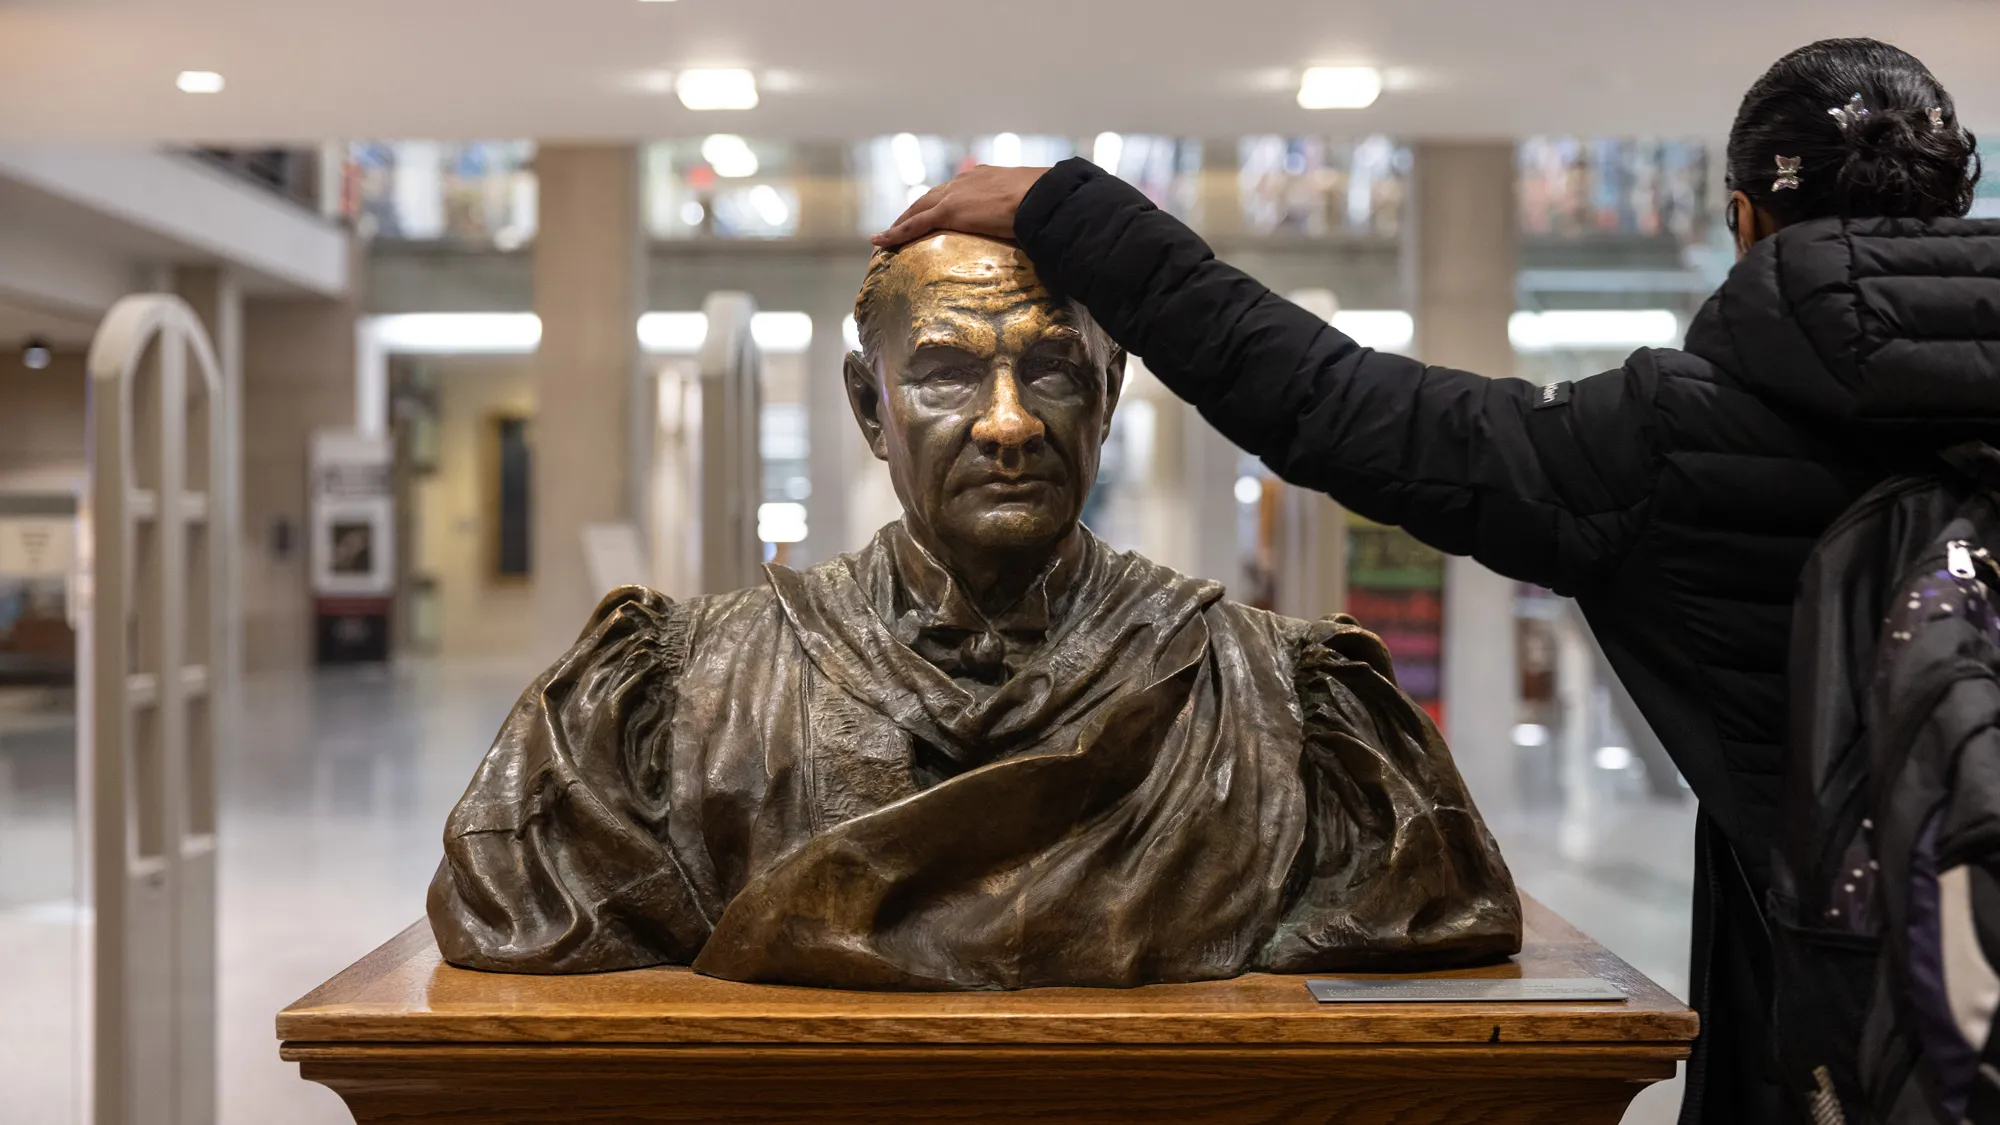 A bronze statue on a wooden pedestal shows a man’s face and chest, shoulders and top of biceps. He looks straight ahead with a serious, perhaps even studious, expression. His forehead and nose—where the statue gets touched a lot—are brighter than other parts, creating dramatic differences, such as on the wrinkles of his forehead. A student seen from behind pats the statue’s head as she walks in. She wears a long winter coat, a backpack slipped over both shoulders and her black hair pulled into a bun.  